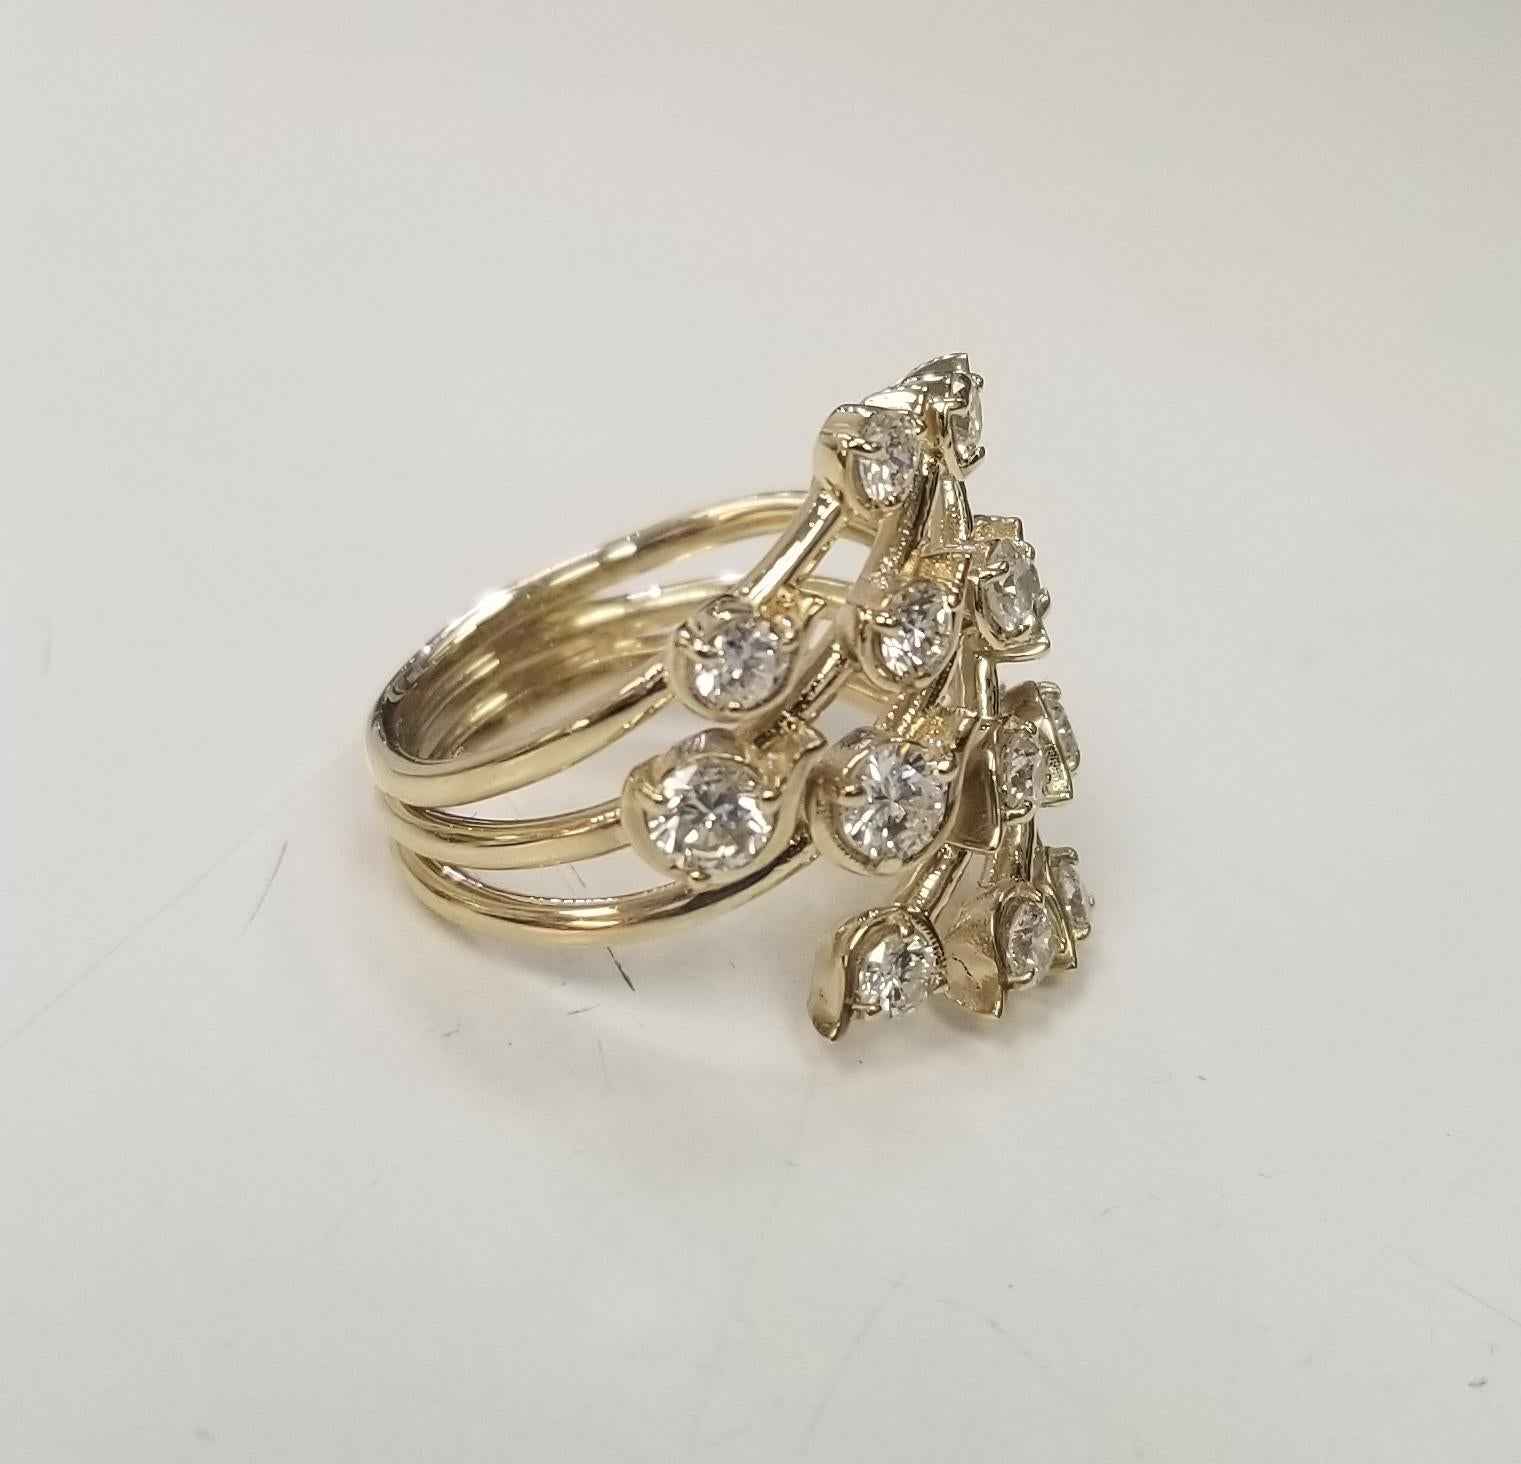 14k yellow gold Free-form diamond ring weighing 1.75cts.
Specifications:
*Motivated to Sell – Please make a Fair Offer*
    main stone:ROUND CUT DIAMOND
    DIAMONDS: 16 PCS
    carat total weight: 1.75 CARAT TOTAL WEIGHT
    color: G
    clarity: